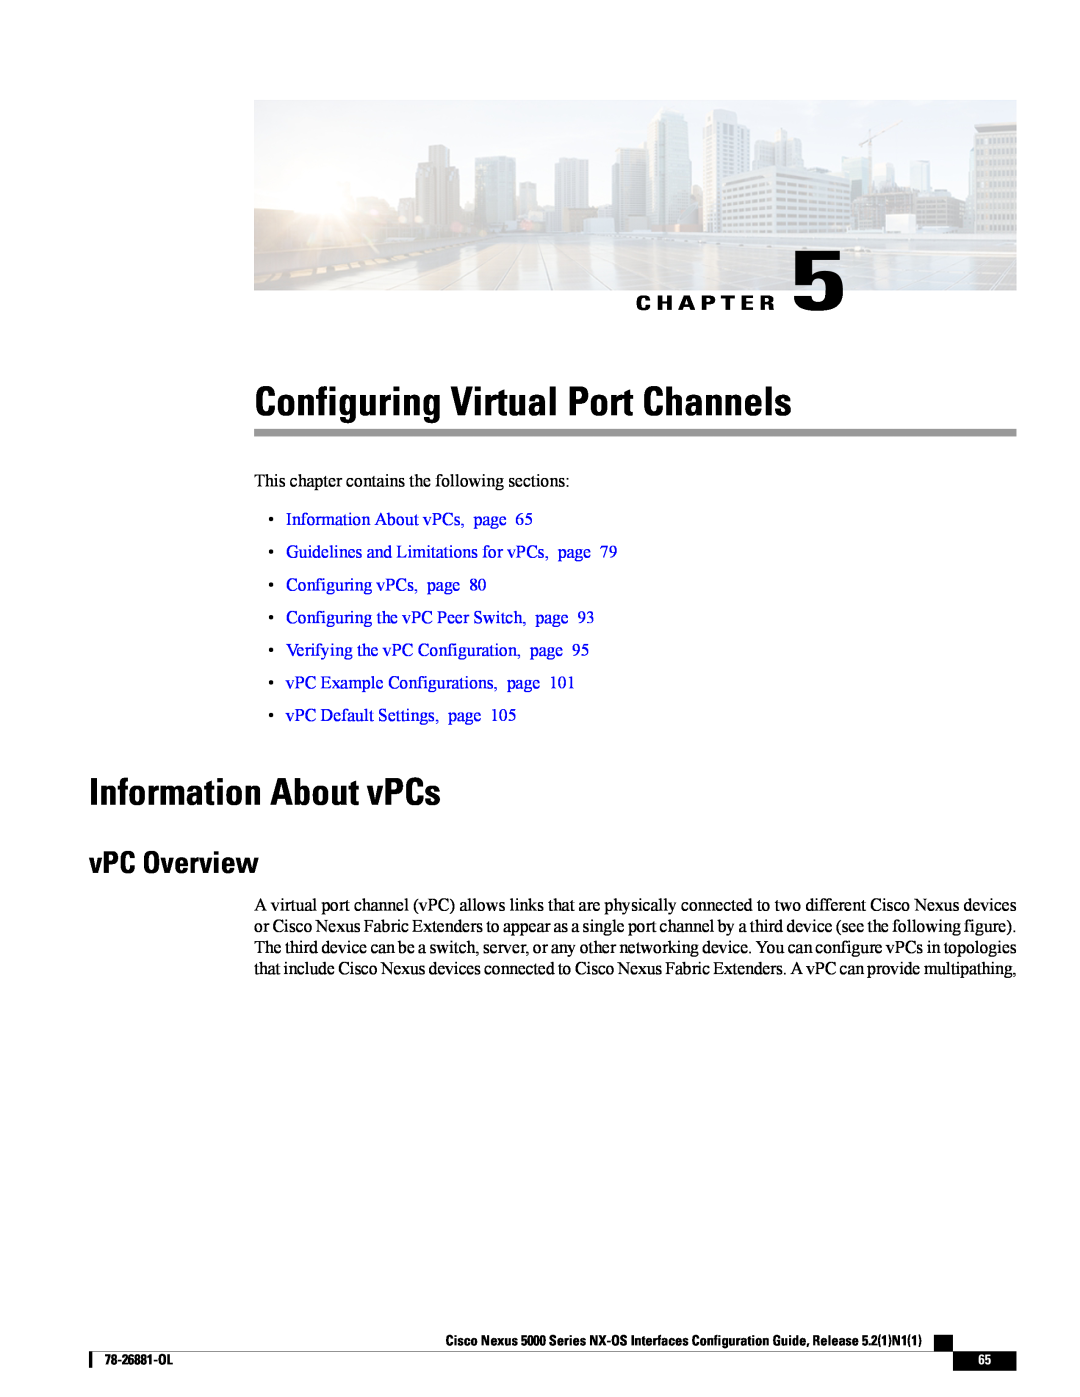 Cisco Systems N5KC5596TFA manual Configuring Virtual Port Channels, Information About vPCs, vPC Overview, C H A P T E R 